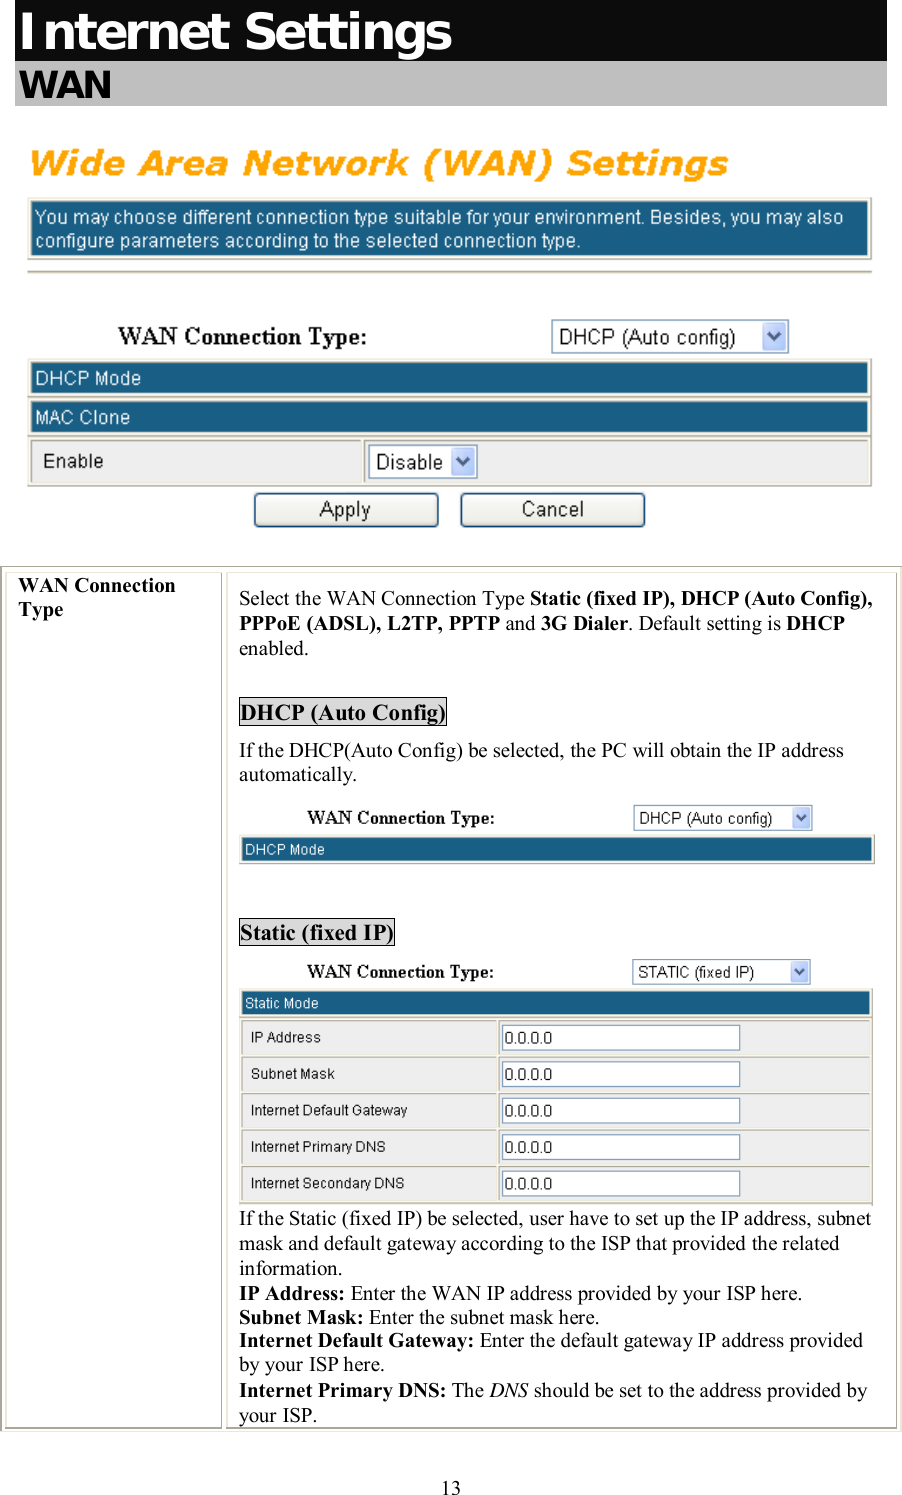    13 Internet Settings  WAN  WAN Connection Type  Select the WAN Connection Type Static (fixed IP), DHCP (Auto Config), PPPoE (ADSL), L2TP, PPTP and 3G Dialer. Default setting is DHCP enabled.  DHCP (Auto Config) If the DHCP(Auto Config) be selected, the PC will obtain the IP address automatically.   Static (fixed IP)  If the Static (fixed IP) be selected, user have to set up the IP address, subnet mask and default gateway according to the ISP that provided the related information. IP Address: Enter the WAN IP address provided by your ISP here. Subnet Mask: Enter the subnet mask here. Internet Default Gateway: Enter the default gateway IP address provided by your ISP here. Internet Primary DNS: The DNS should be set to the address provided by your ISP. 